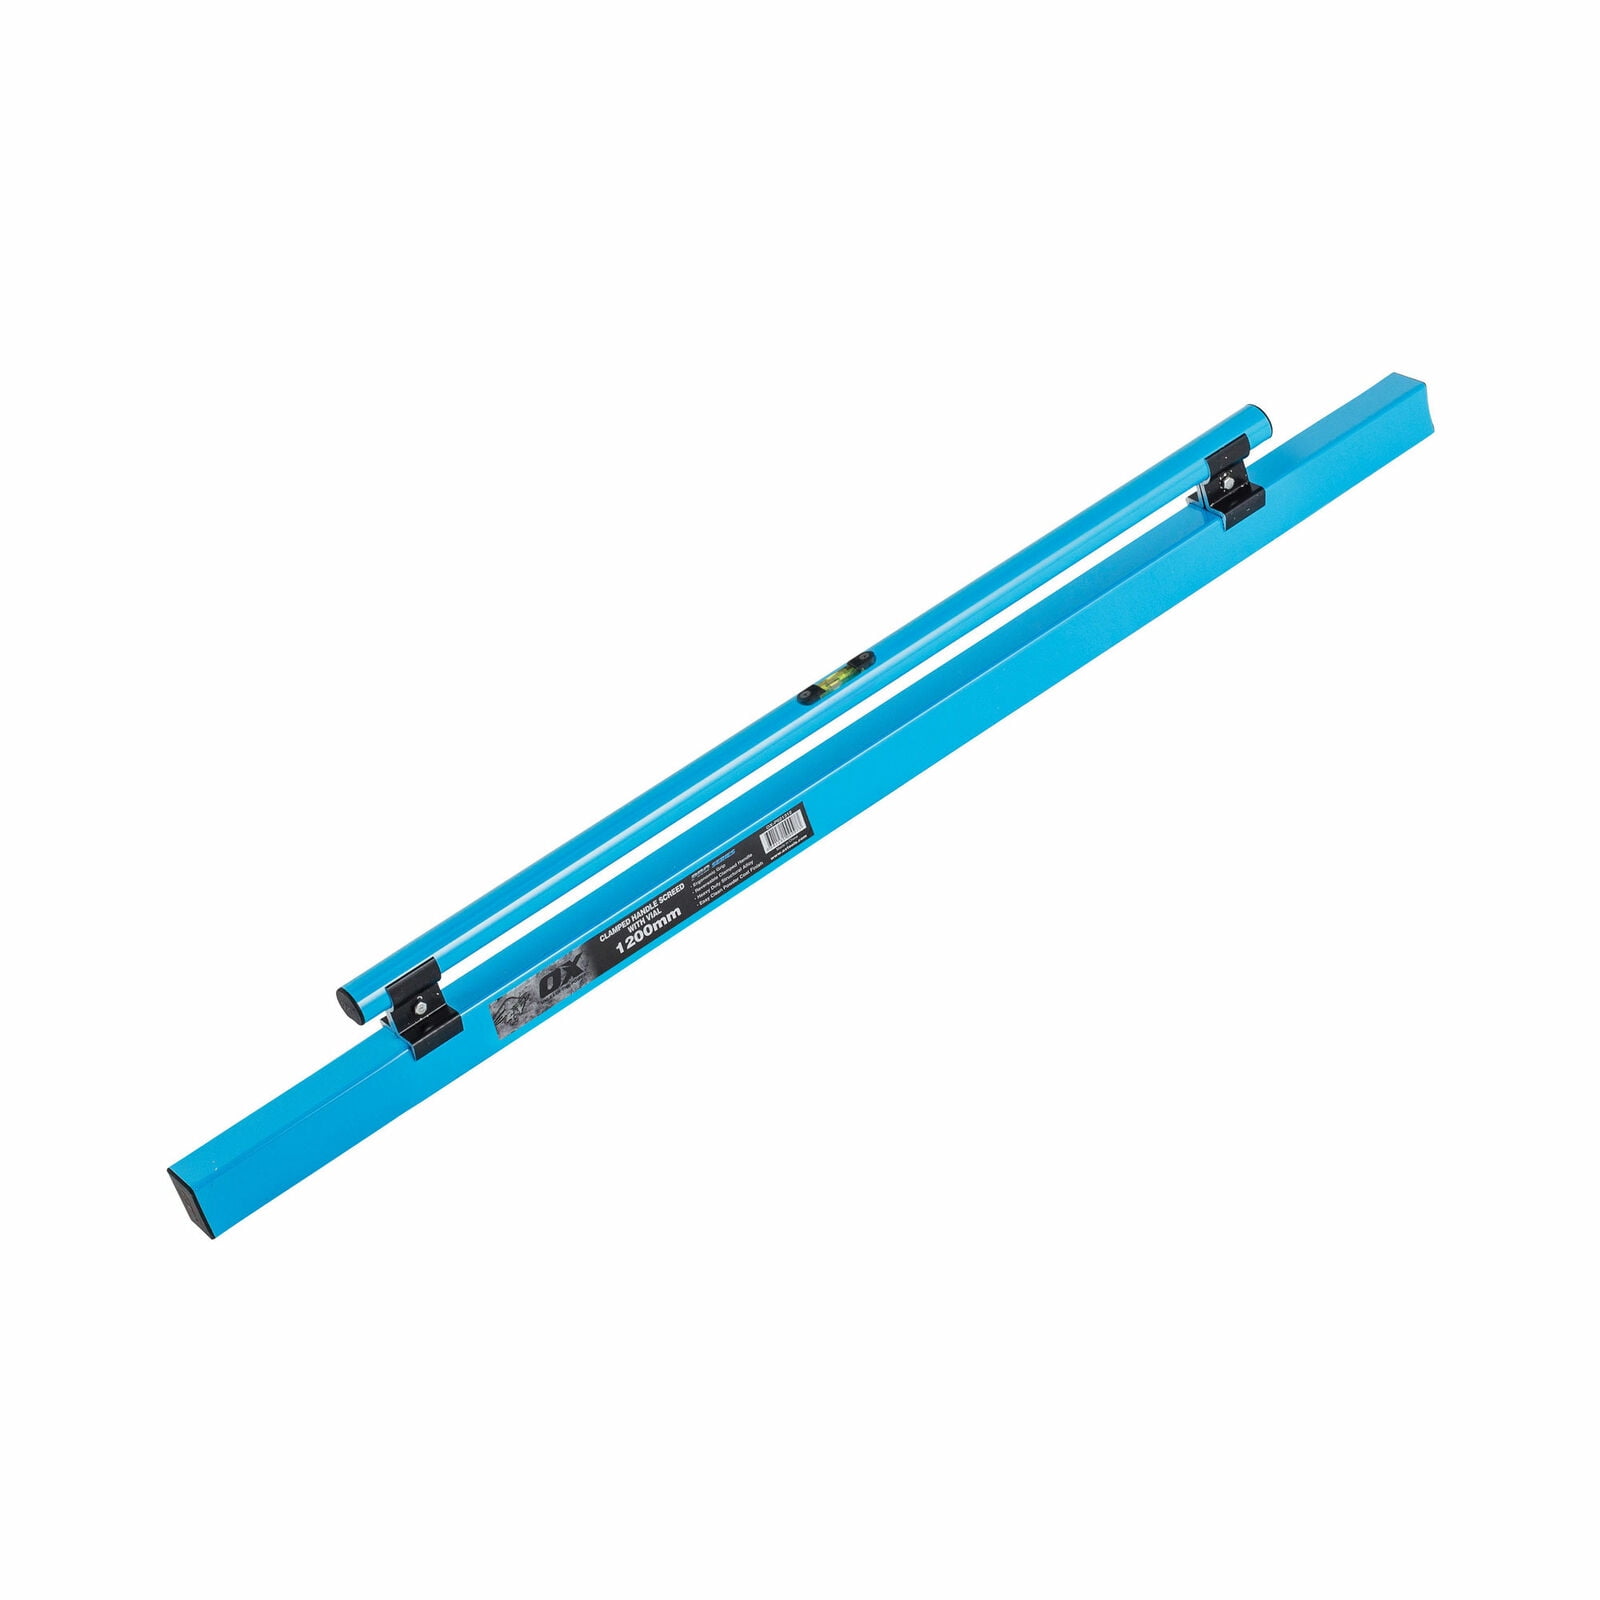 OX Tools 96 Inch Standard Concrete Screed Aluminum Straight Edge Blue 2 Pack 